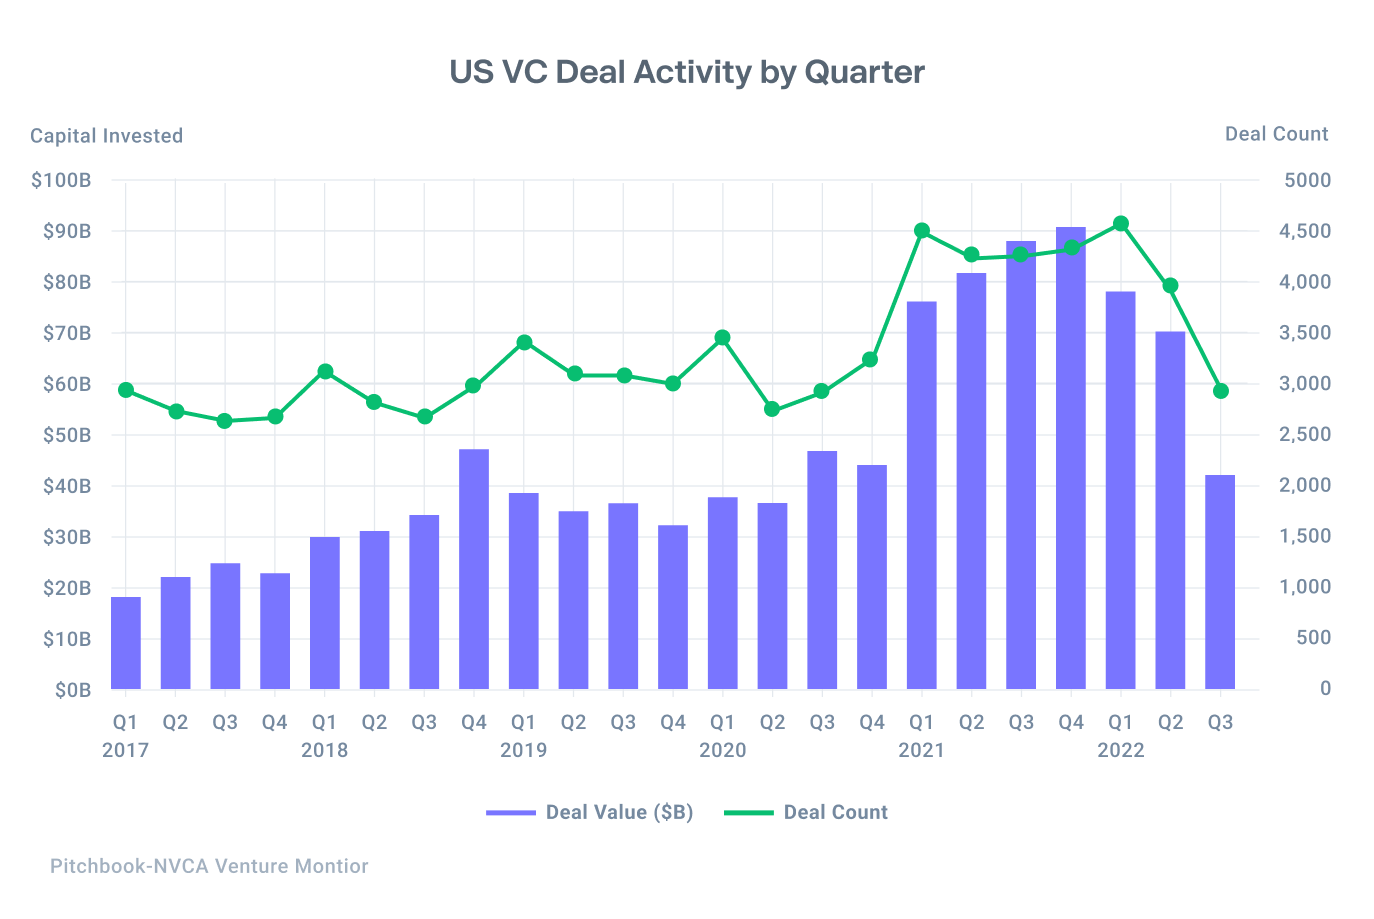 Chart shows that since 2022 the number and value of US VC deals has been declining